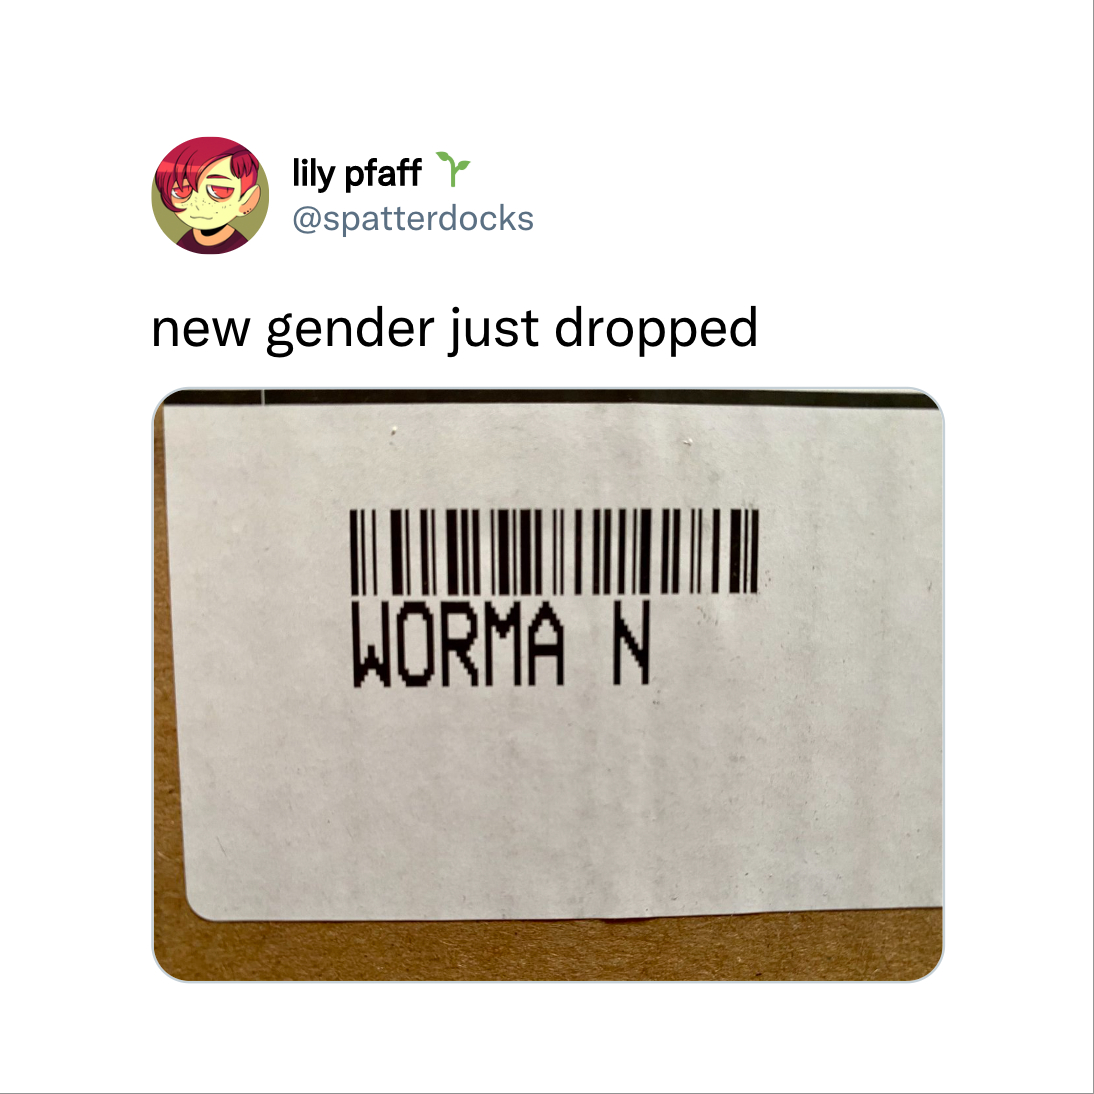 label - lily pfaff new gender just dropped Worma N